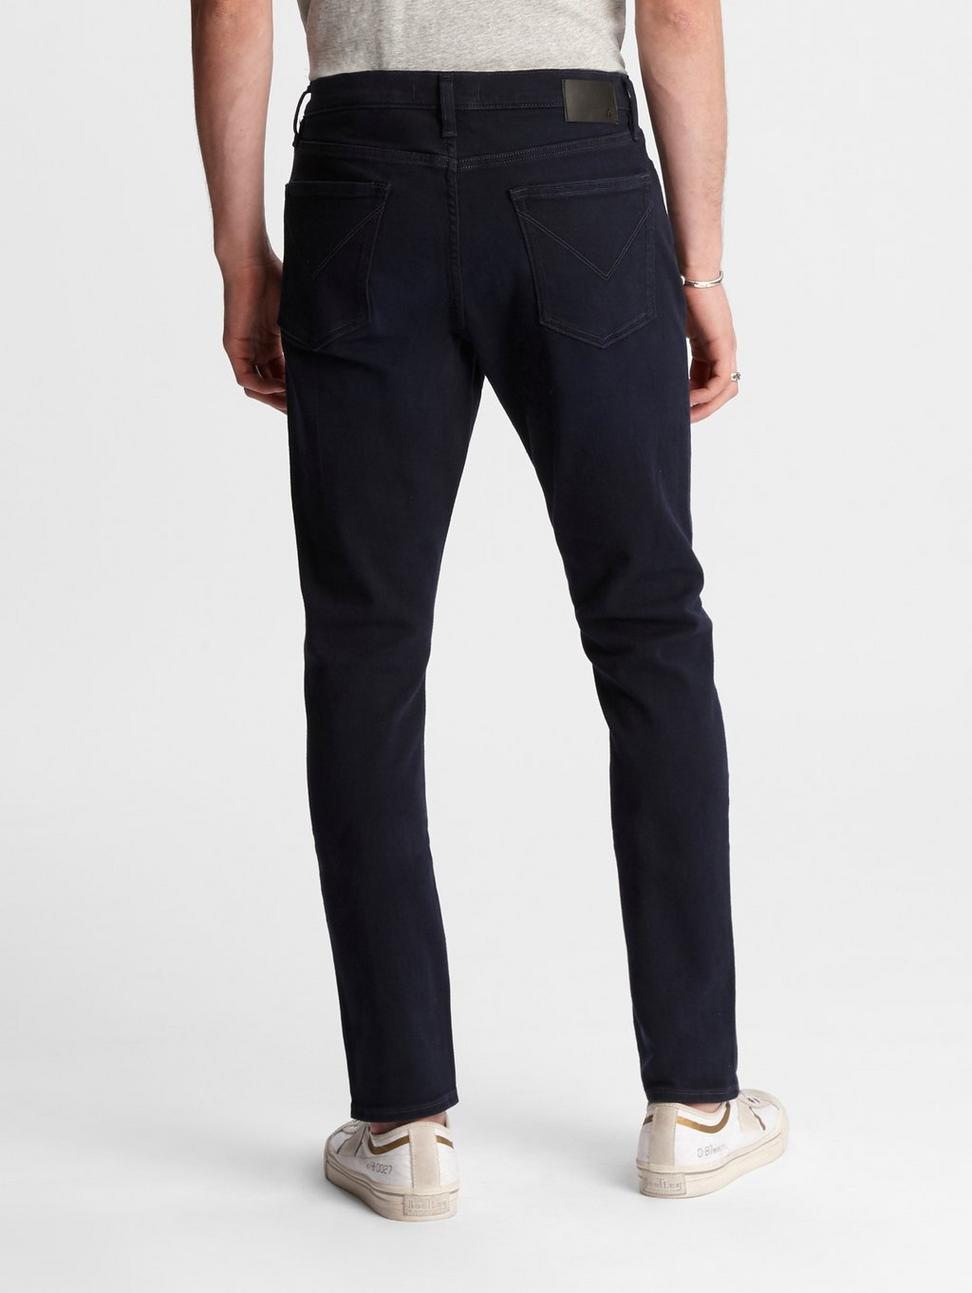 The Bowery Fit Jean in Starman Wash